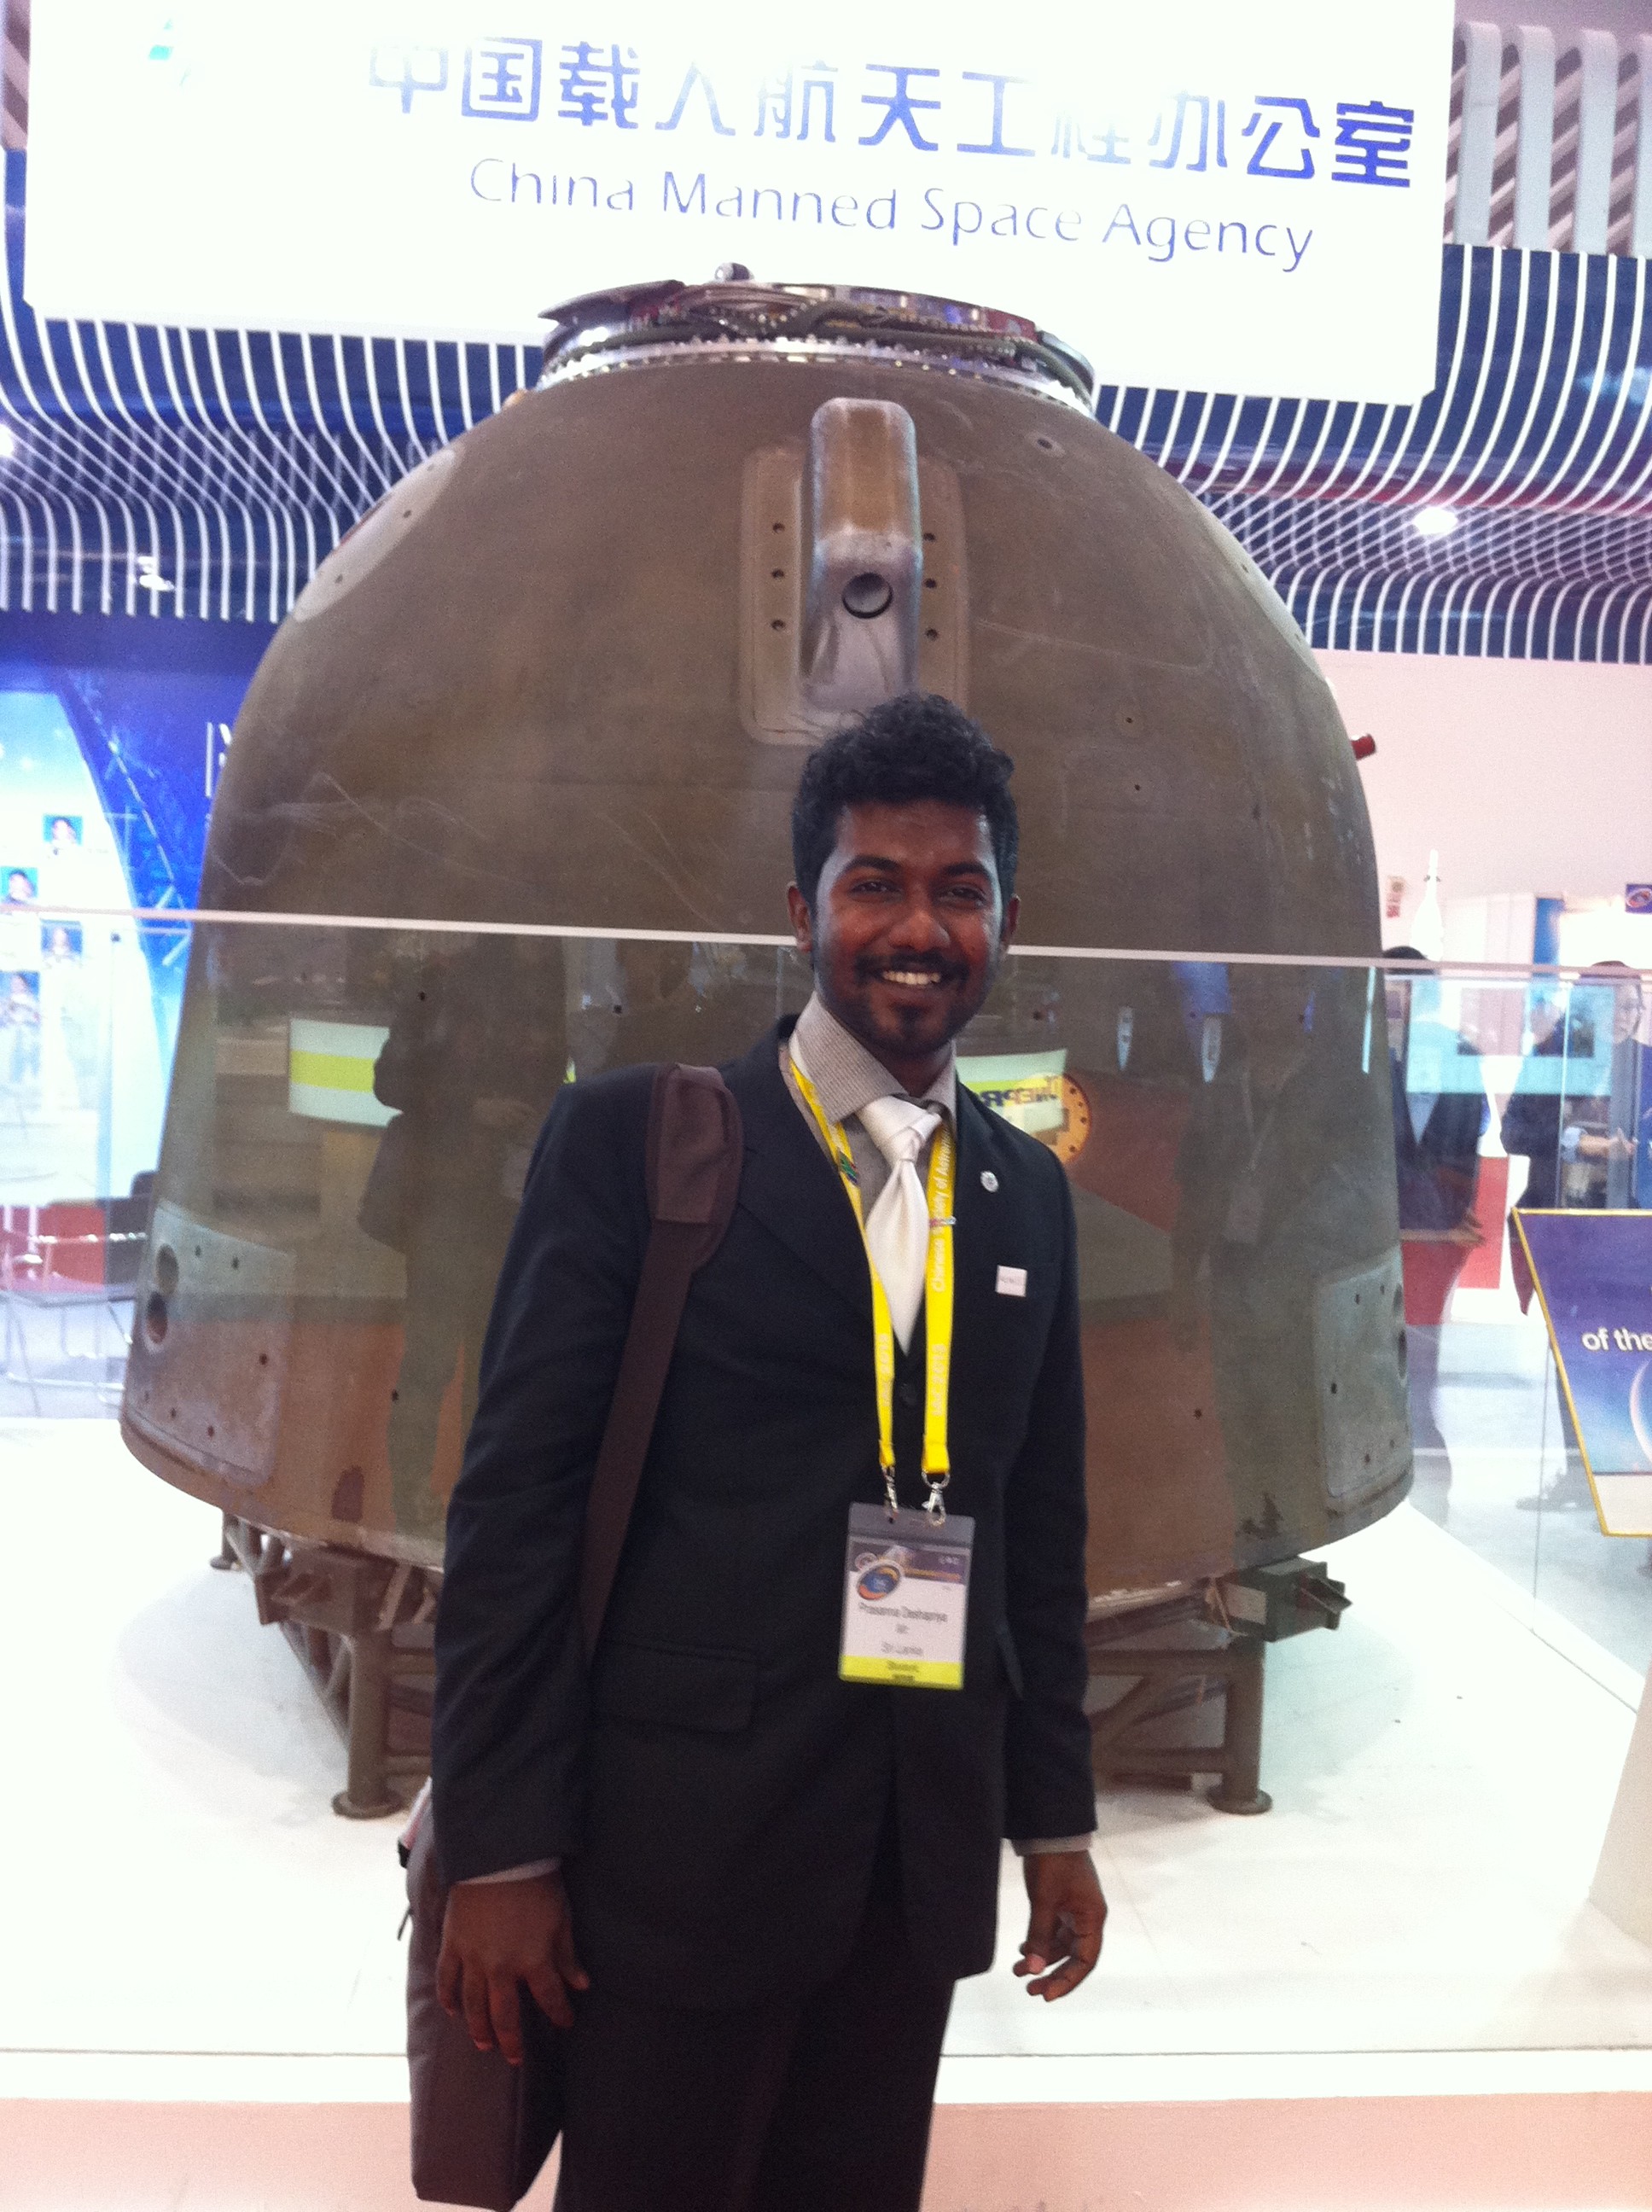 With the re-entry module of the Chinese Shenzhou-10 spaceship